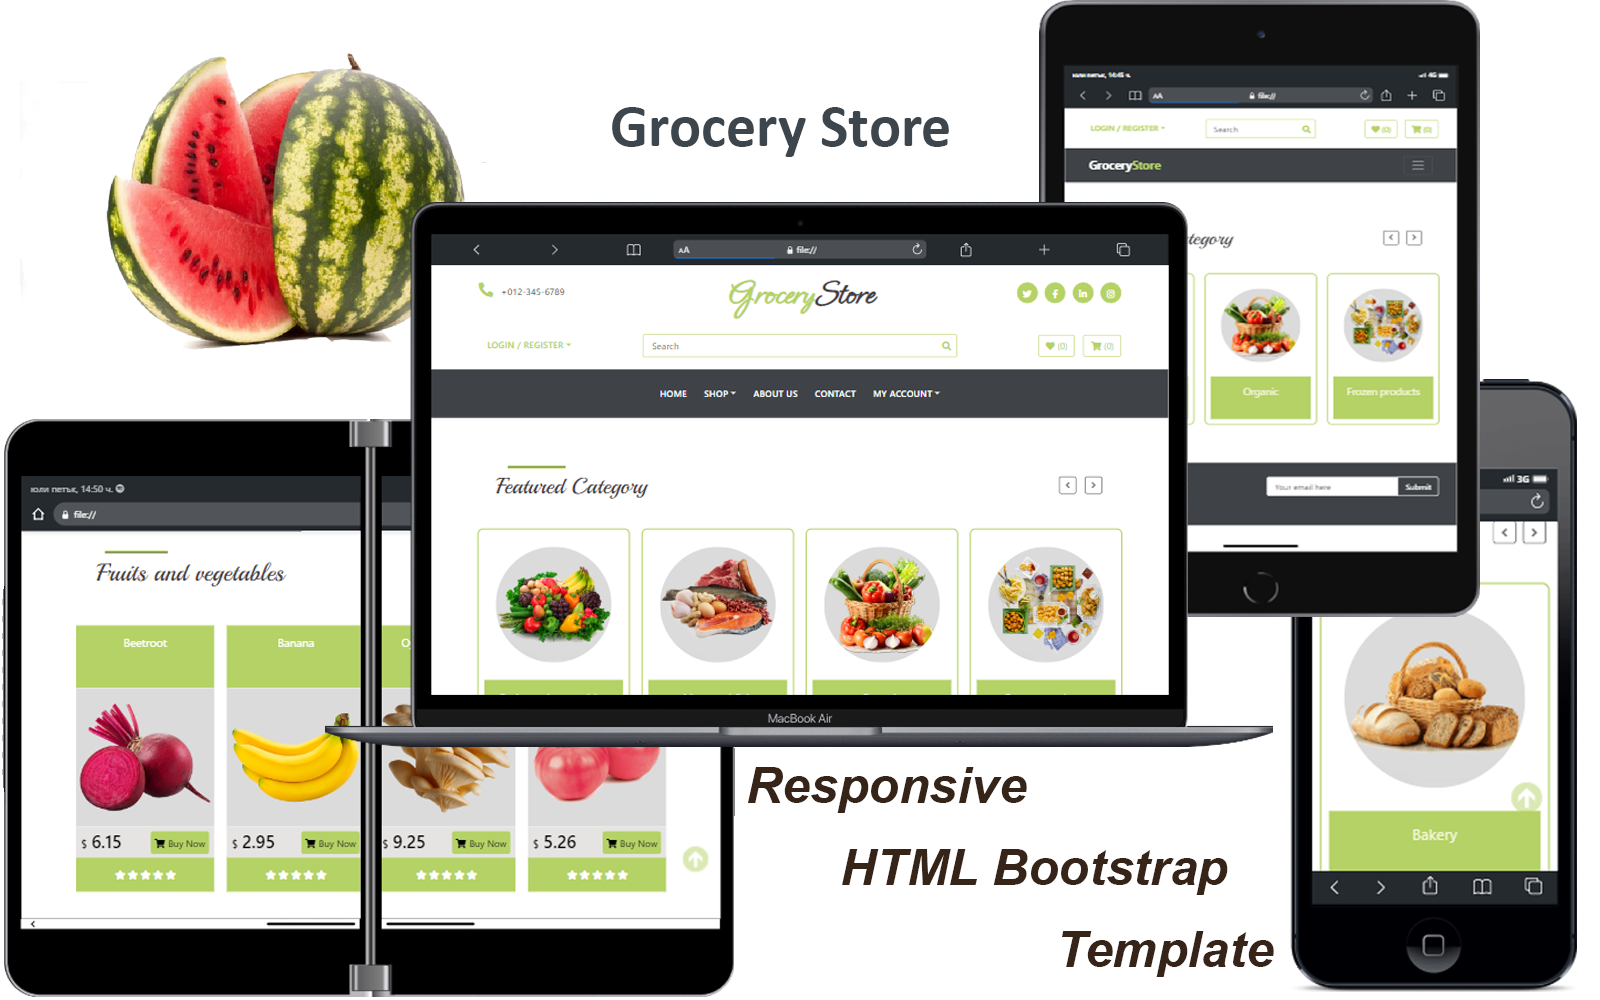 Grocery Store - Responsive HTML Bootstrap Template